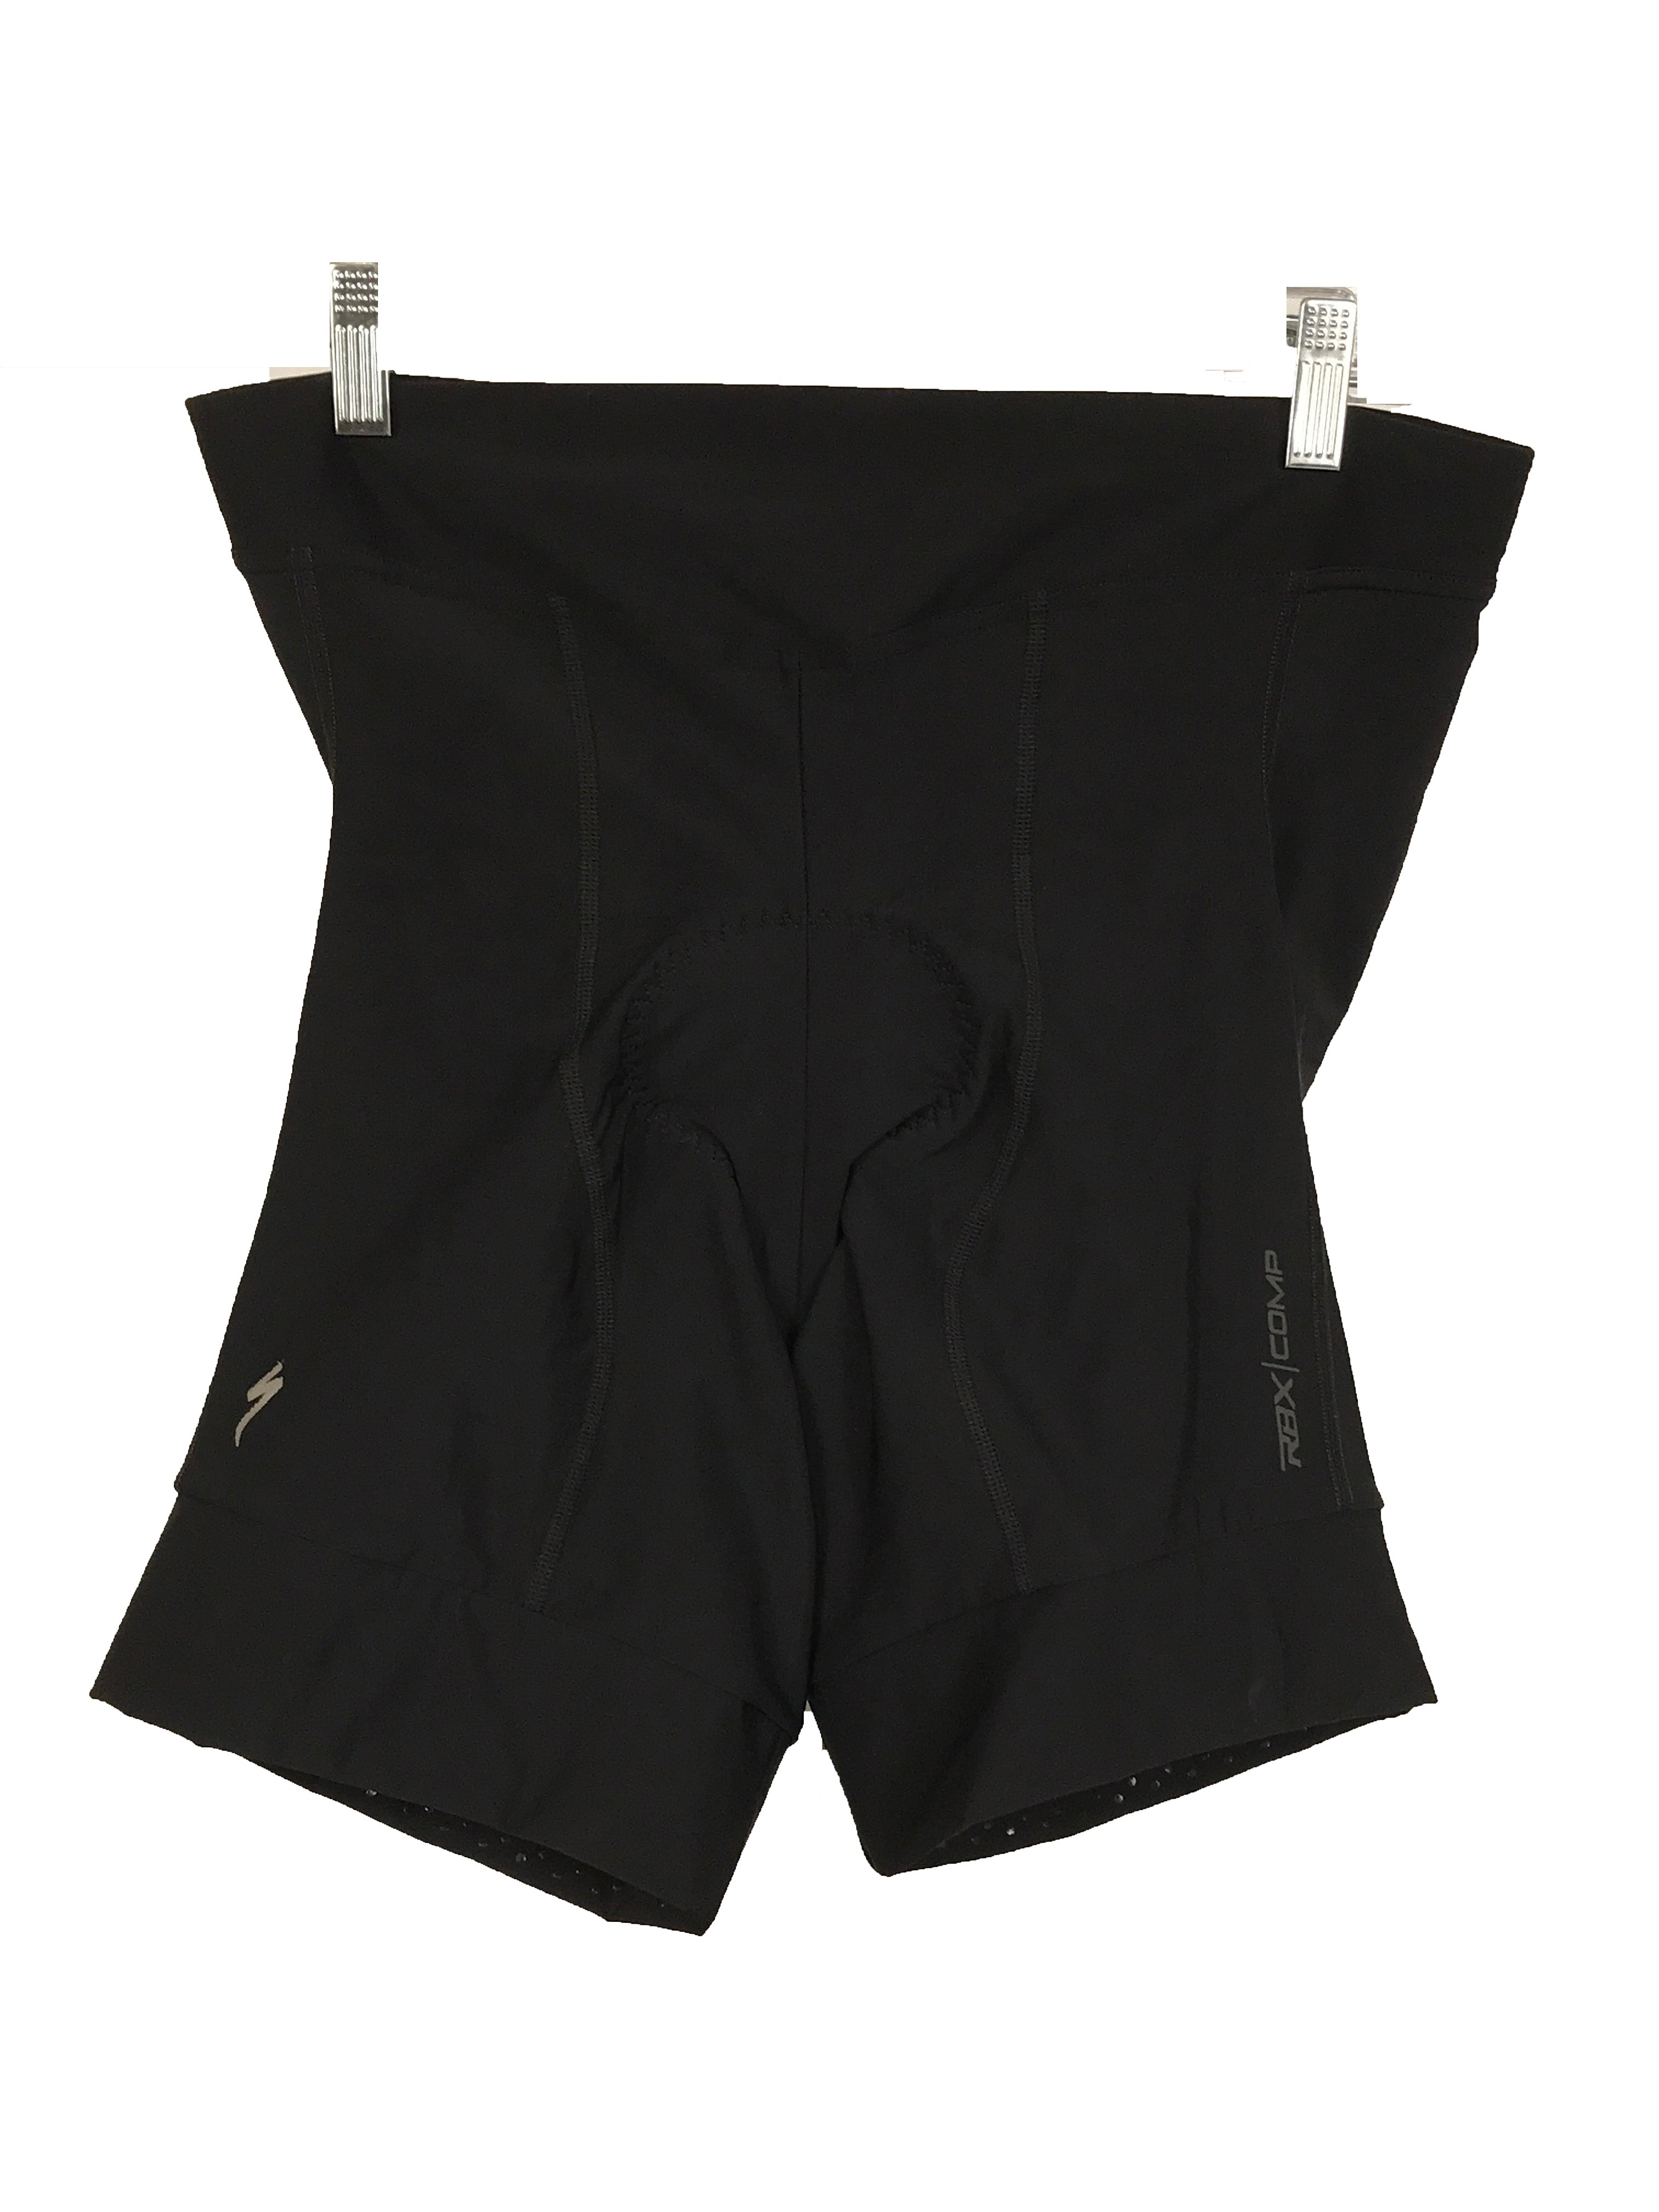 Specialized RBX Comp Black Shorts with Chamois Women's Size XL NWT